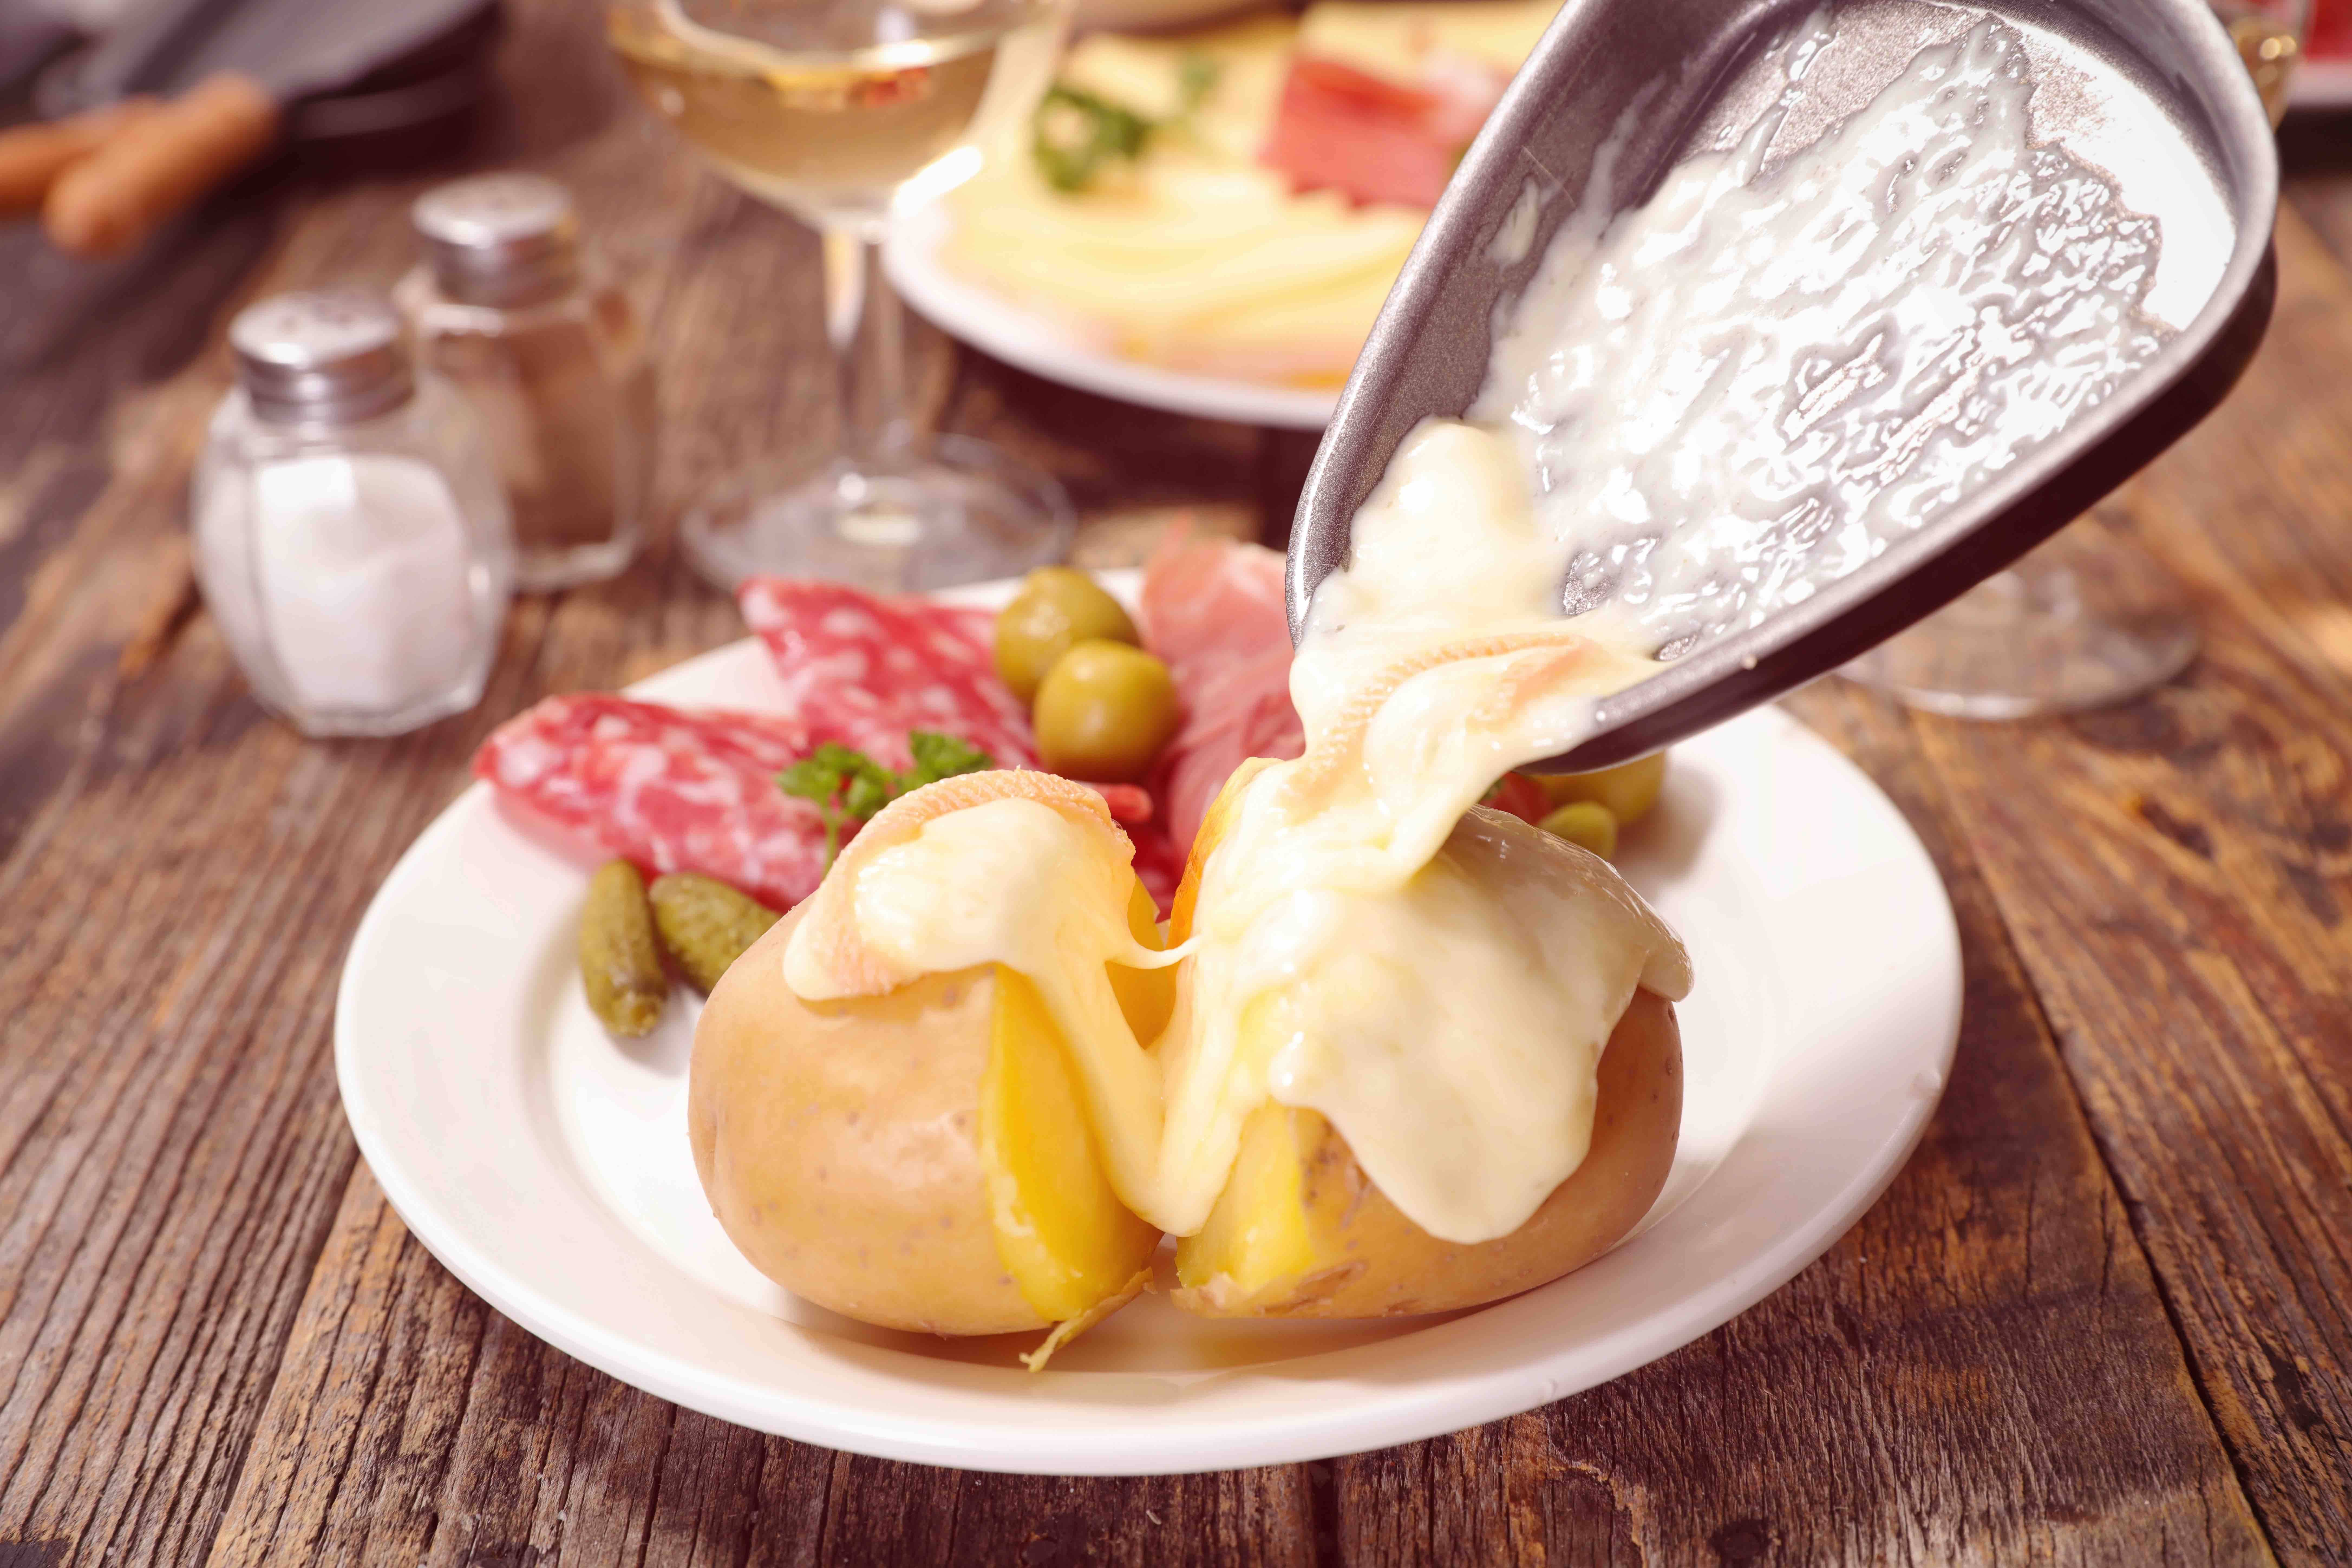 Potatoes of the world – From Switzerland: Raclette